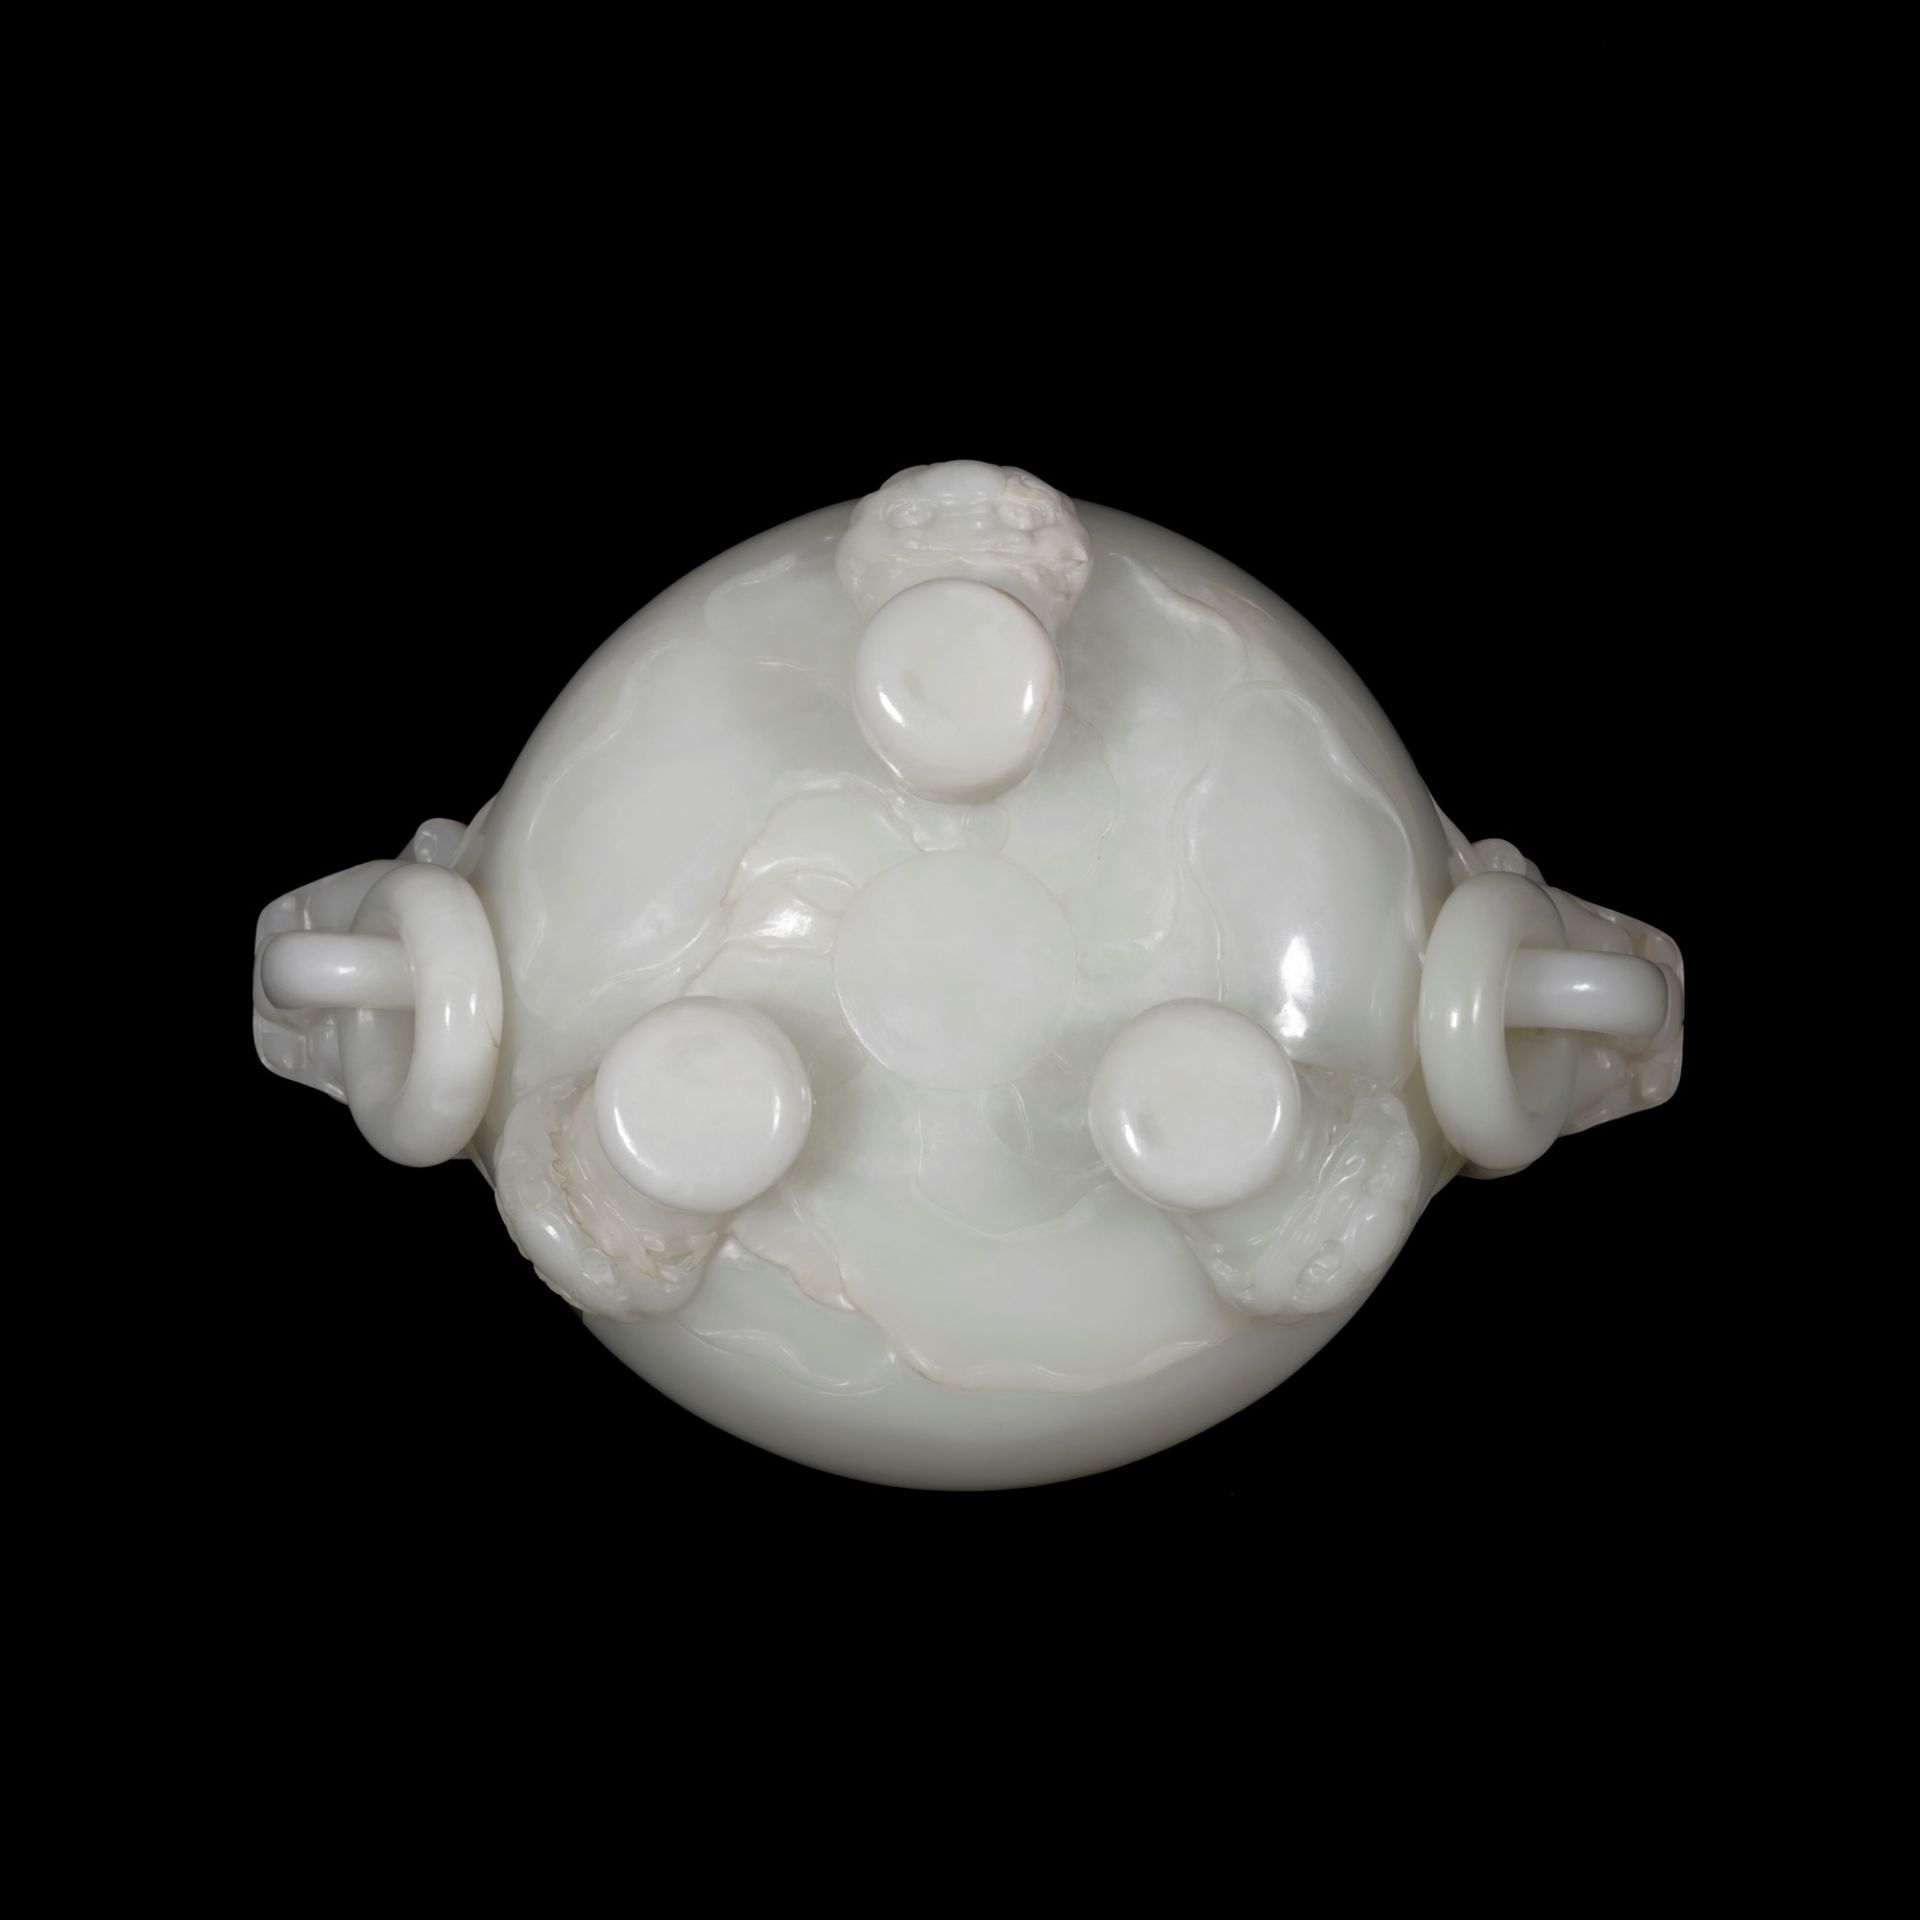 A FINE WHITE TRIP POD CENSER AND COVER, China, Qing dynasty, 19th century - Image 7 of 10